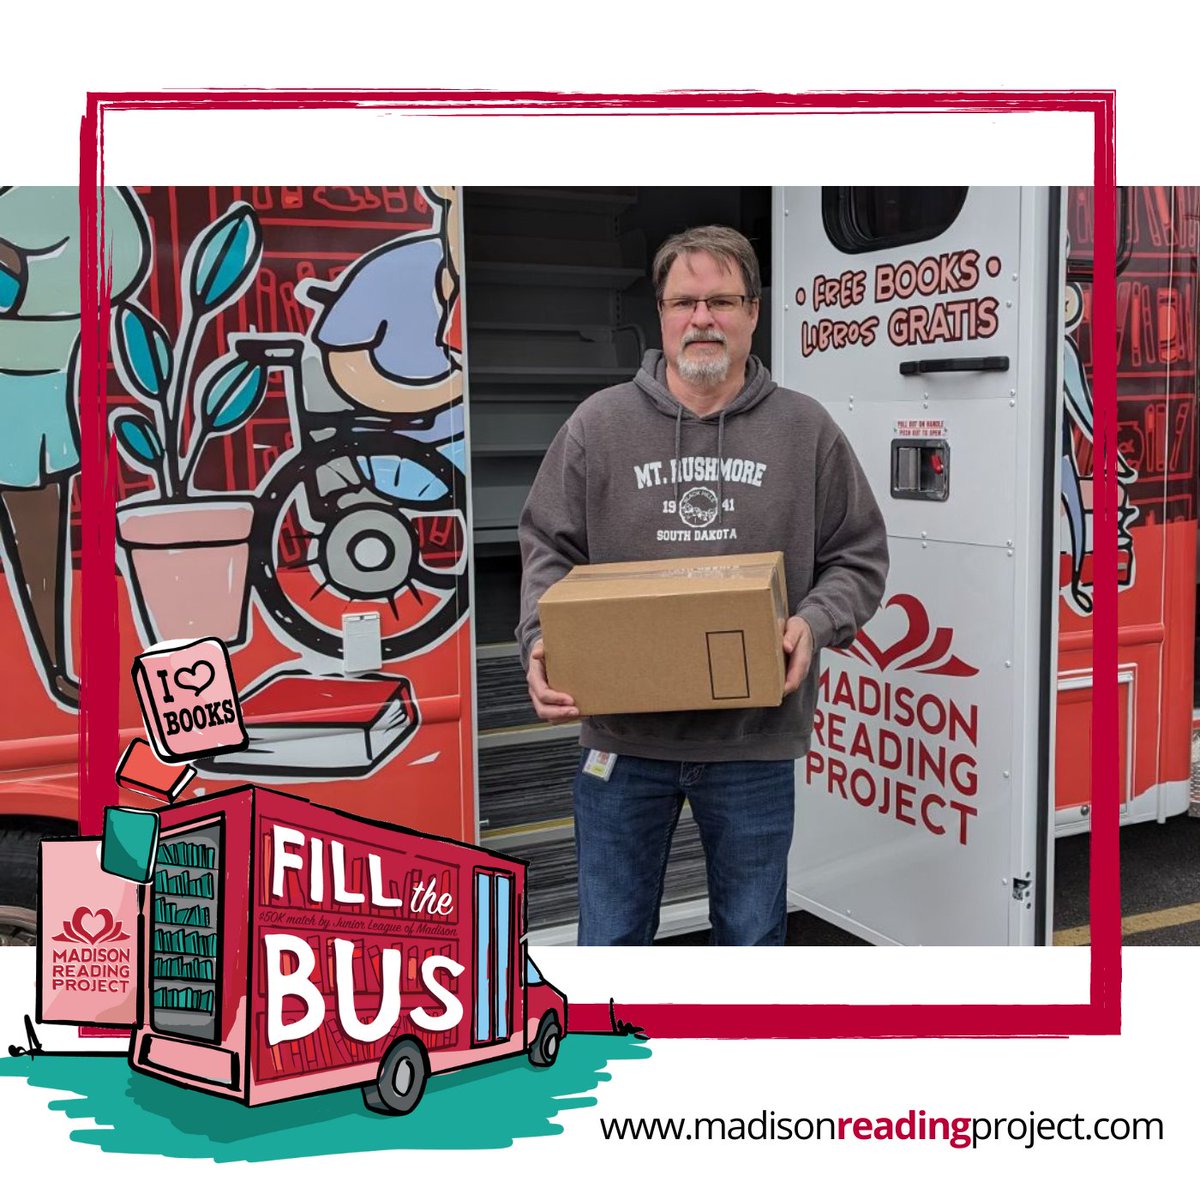 📚 Thank you so much to our Bus 2.0 sponsor American Girl for helping us fill the bus with over 500 brand-new children's books!! We are so grateful for your support and know the kids will love them. 💛🎉

#BeepBeep #MadisonWI #NewBUSFeeling #NewBookFeeling #AmericanGirl